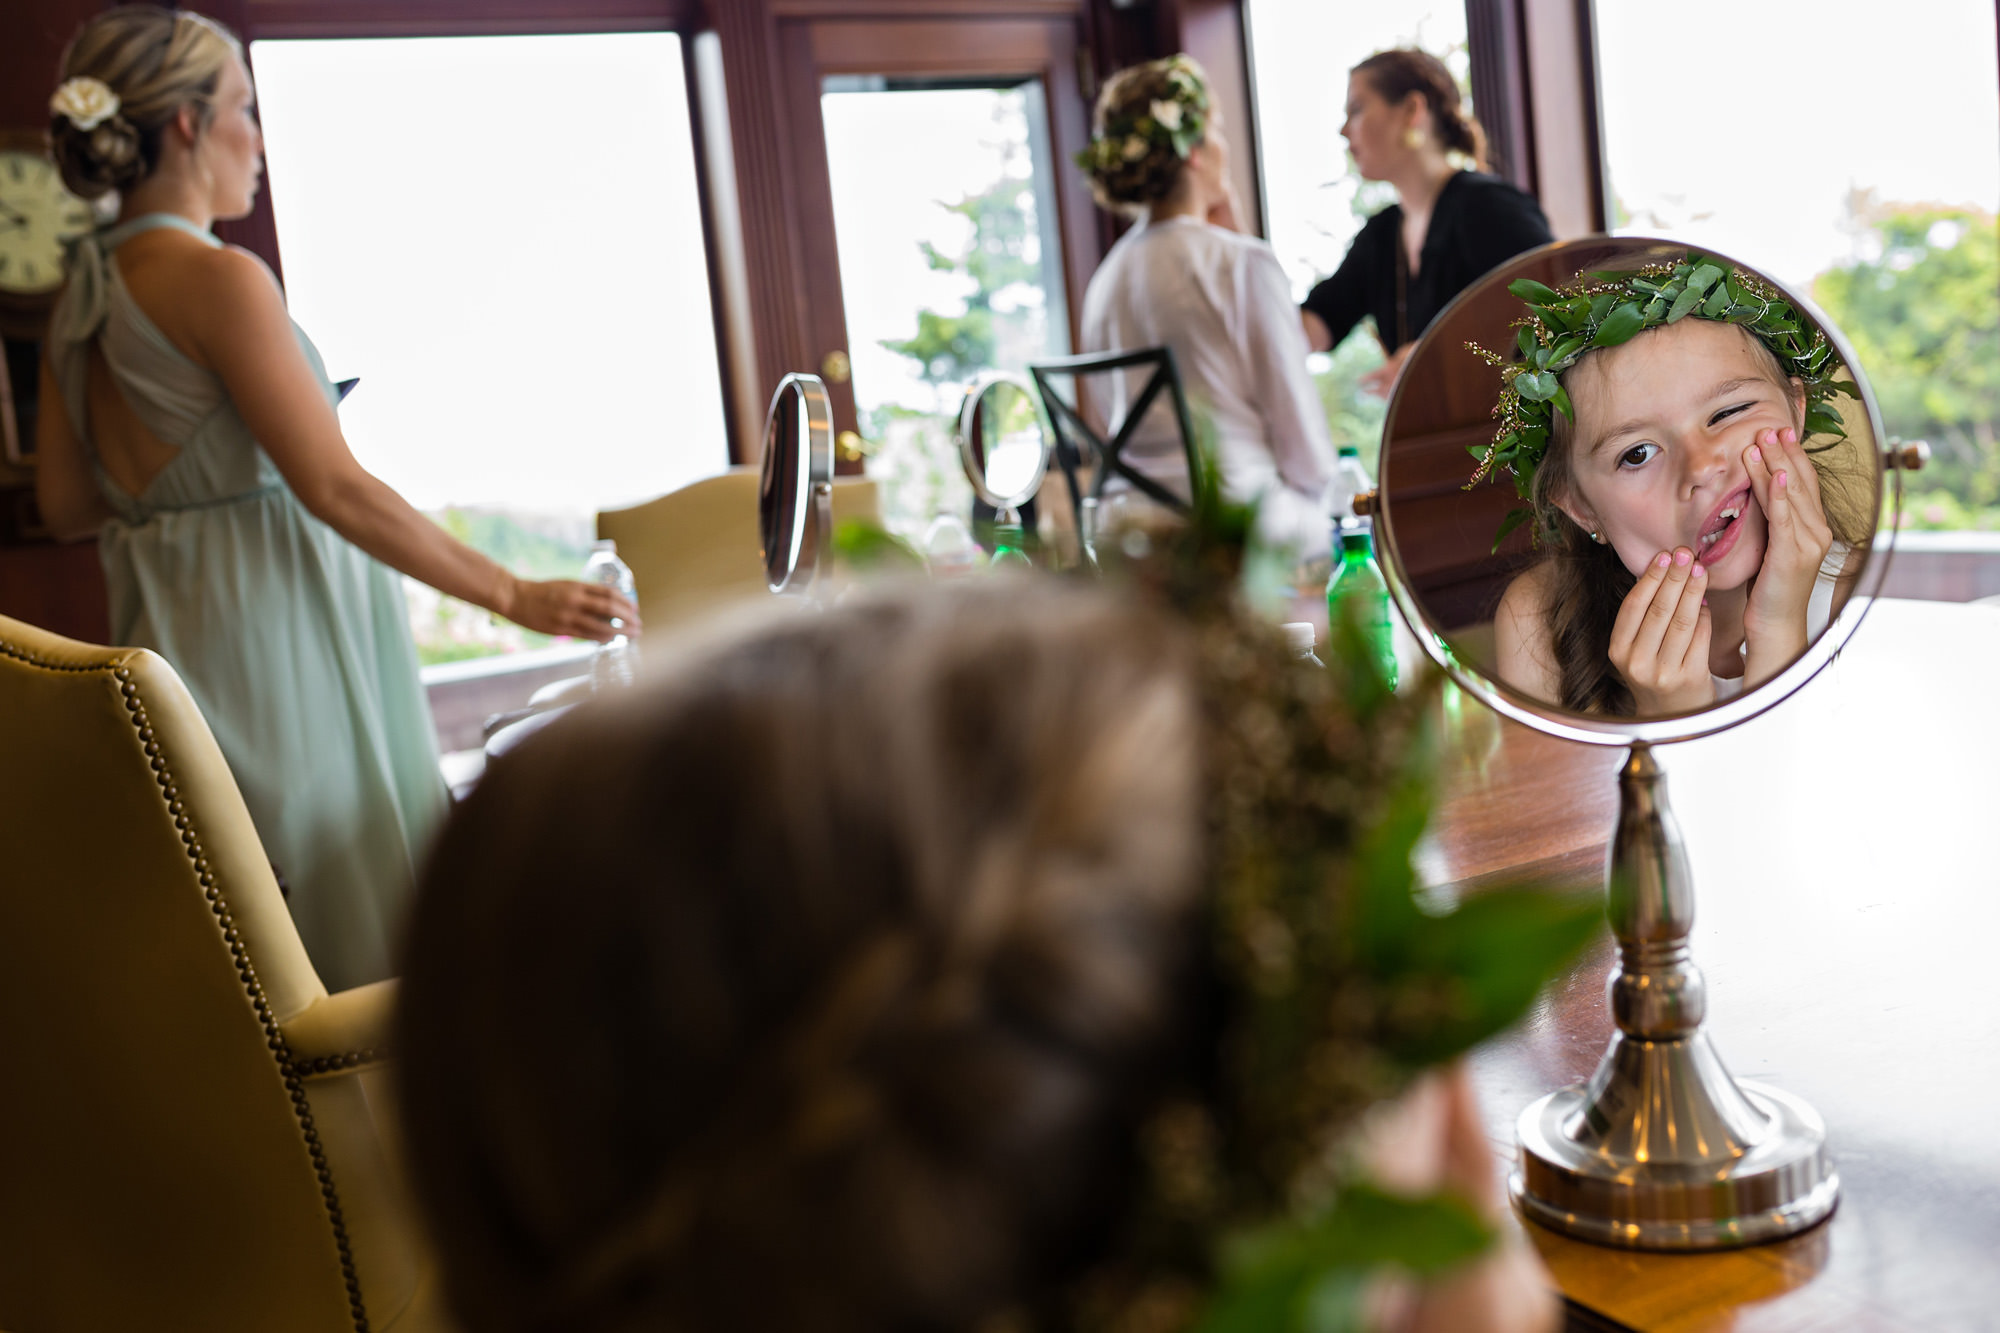 A flower girl pulls funny faces while getting ready for a wedding.